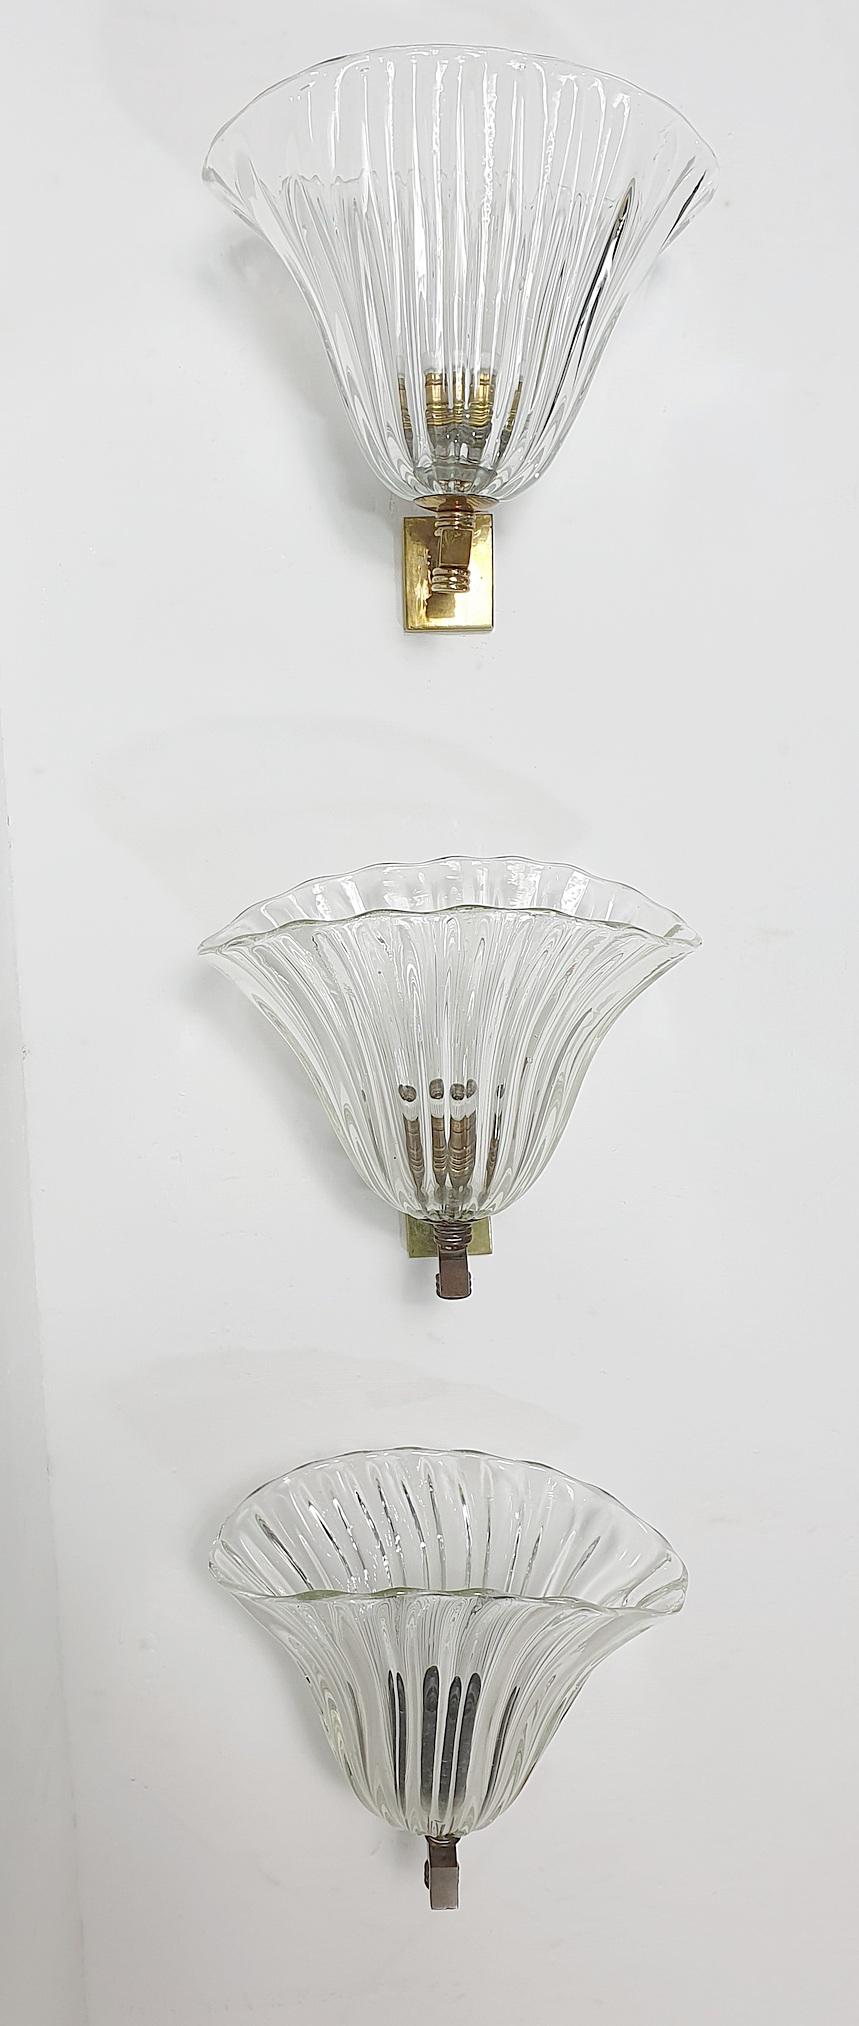 An original 1950's wall sconce produced by Seguso in Murano, Italy in perfect condition and have the original bracket designed for this glass specifically. There is only one of these.